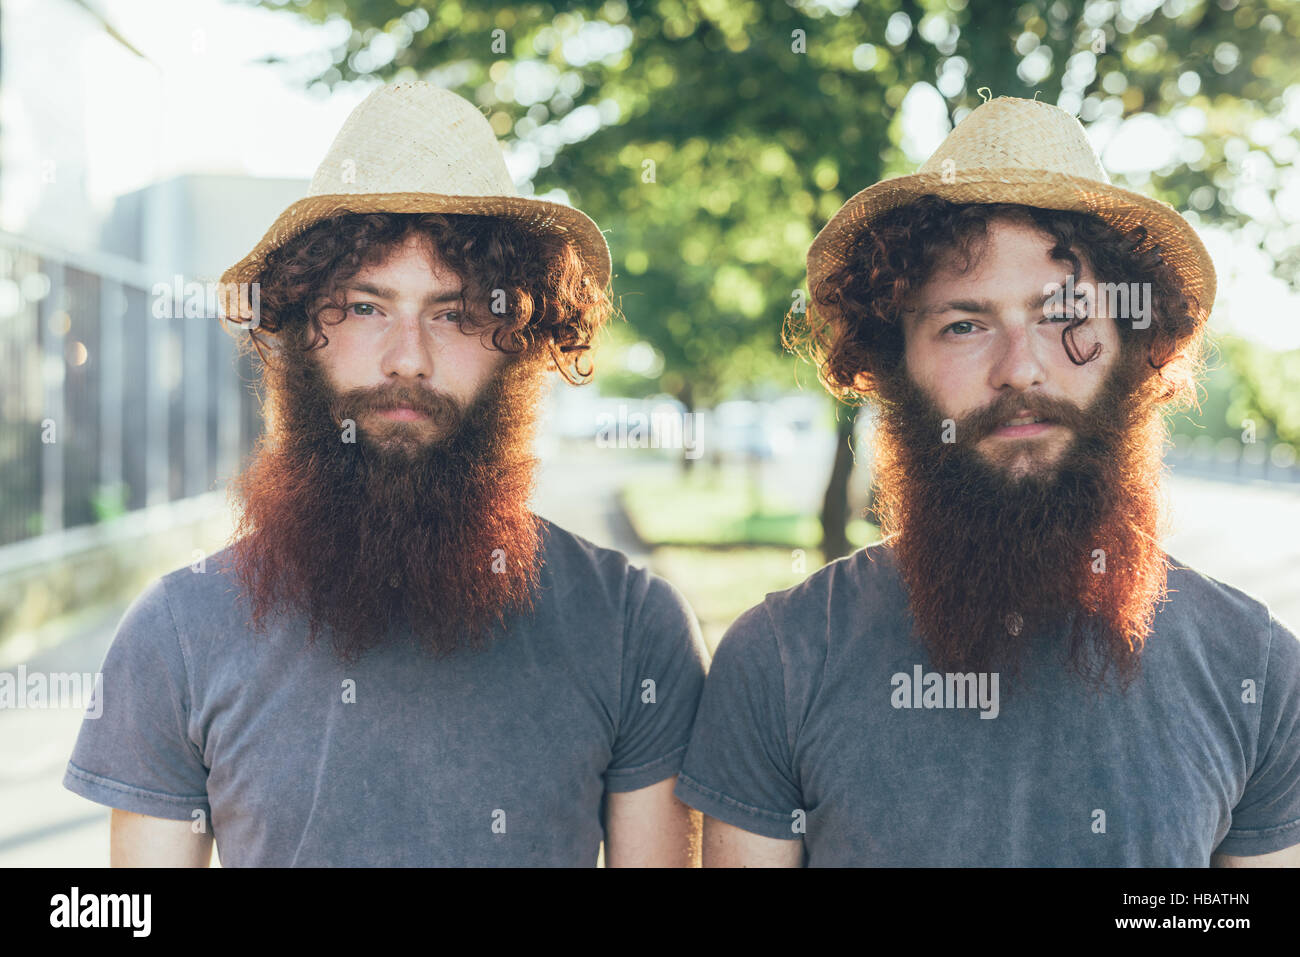 Portrait of identical male hipster twins wearing straw hats on sidewalk Stock Photo